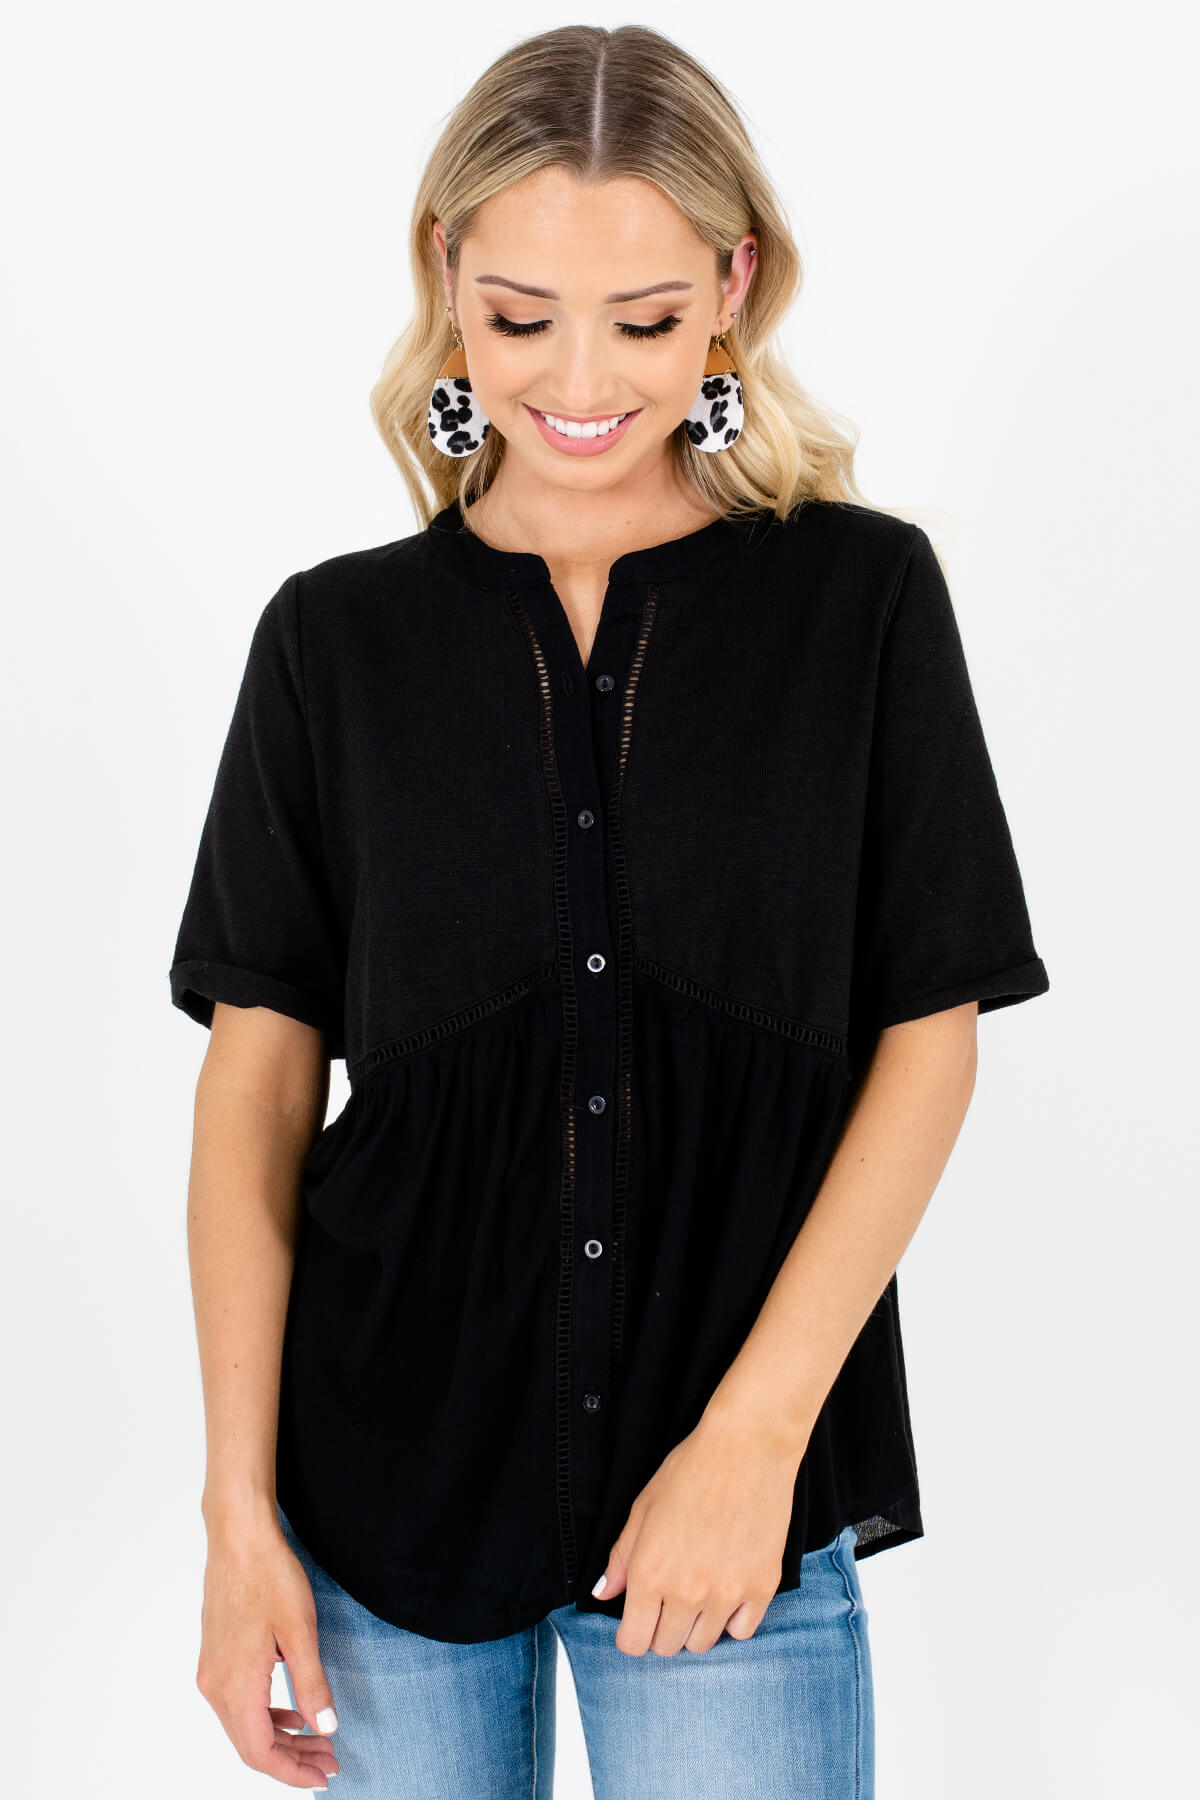 Black Button Up Cute Tops Affordable Online Boutique